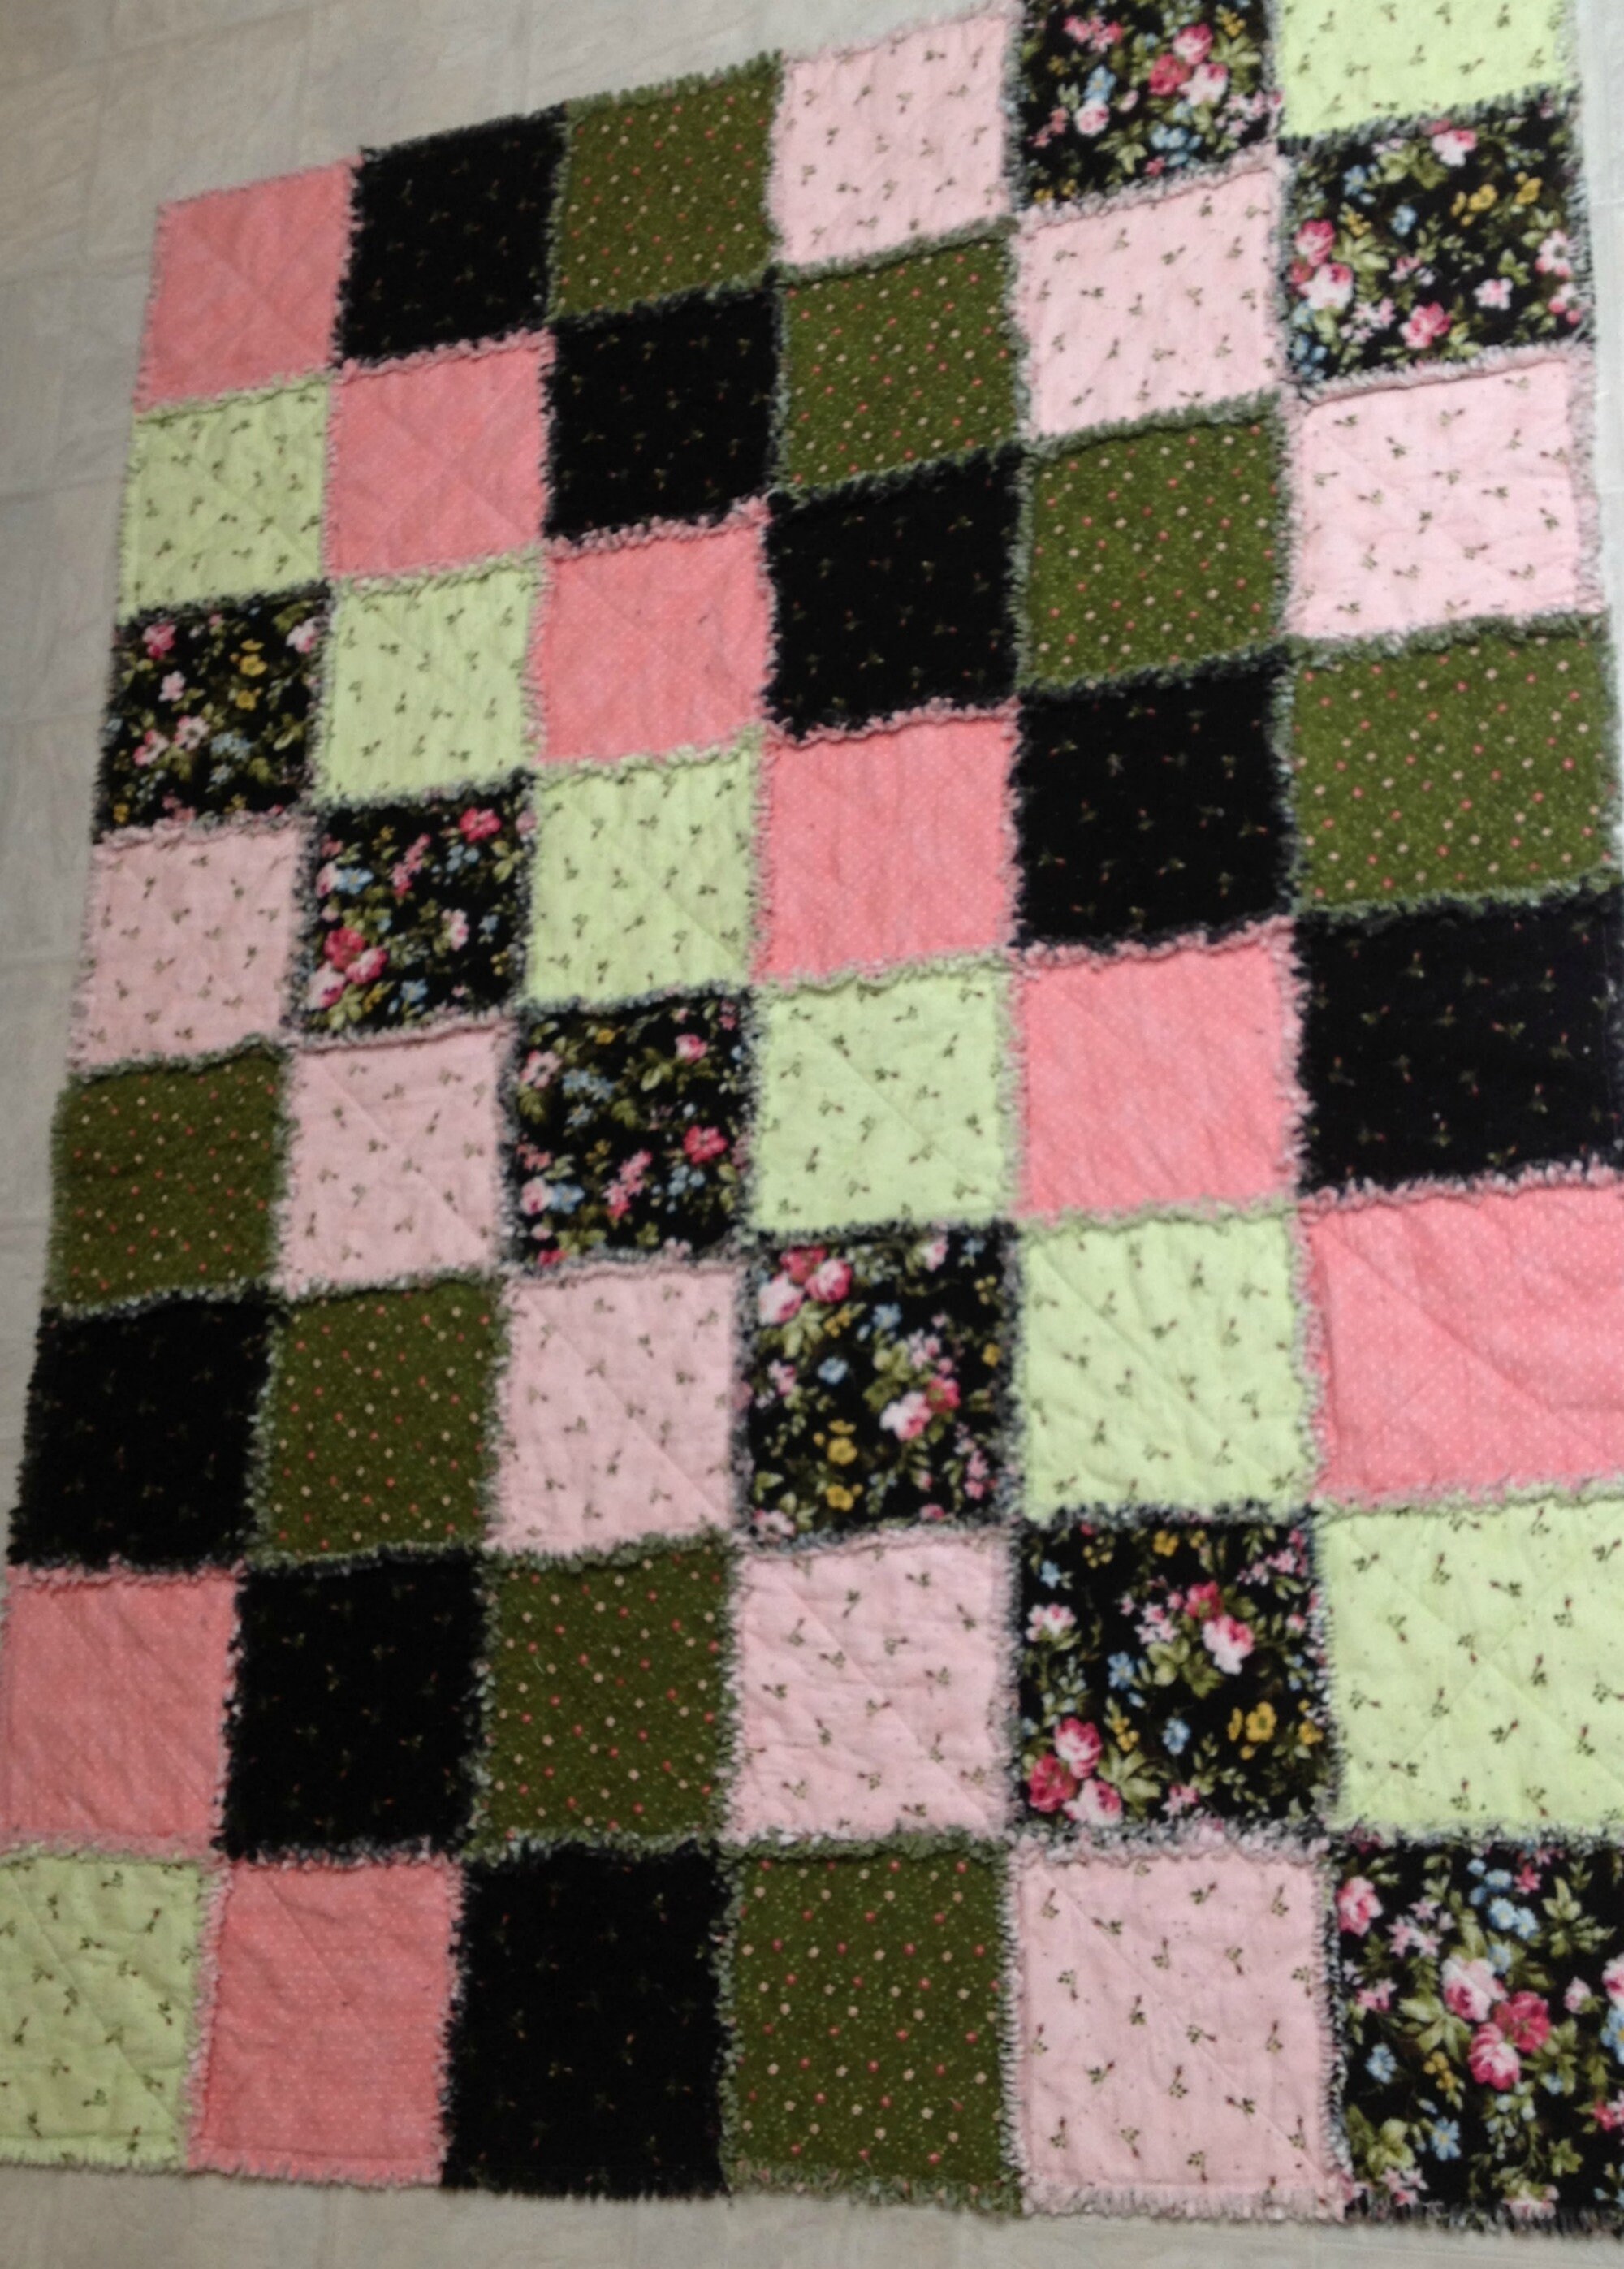 Pink and Green Rag Quilt Handmade Quilts for Sale Wall   Etsy